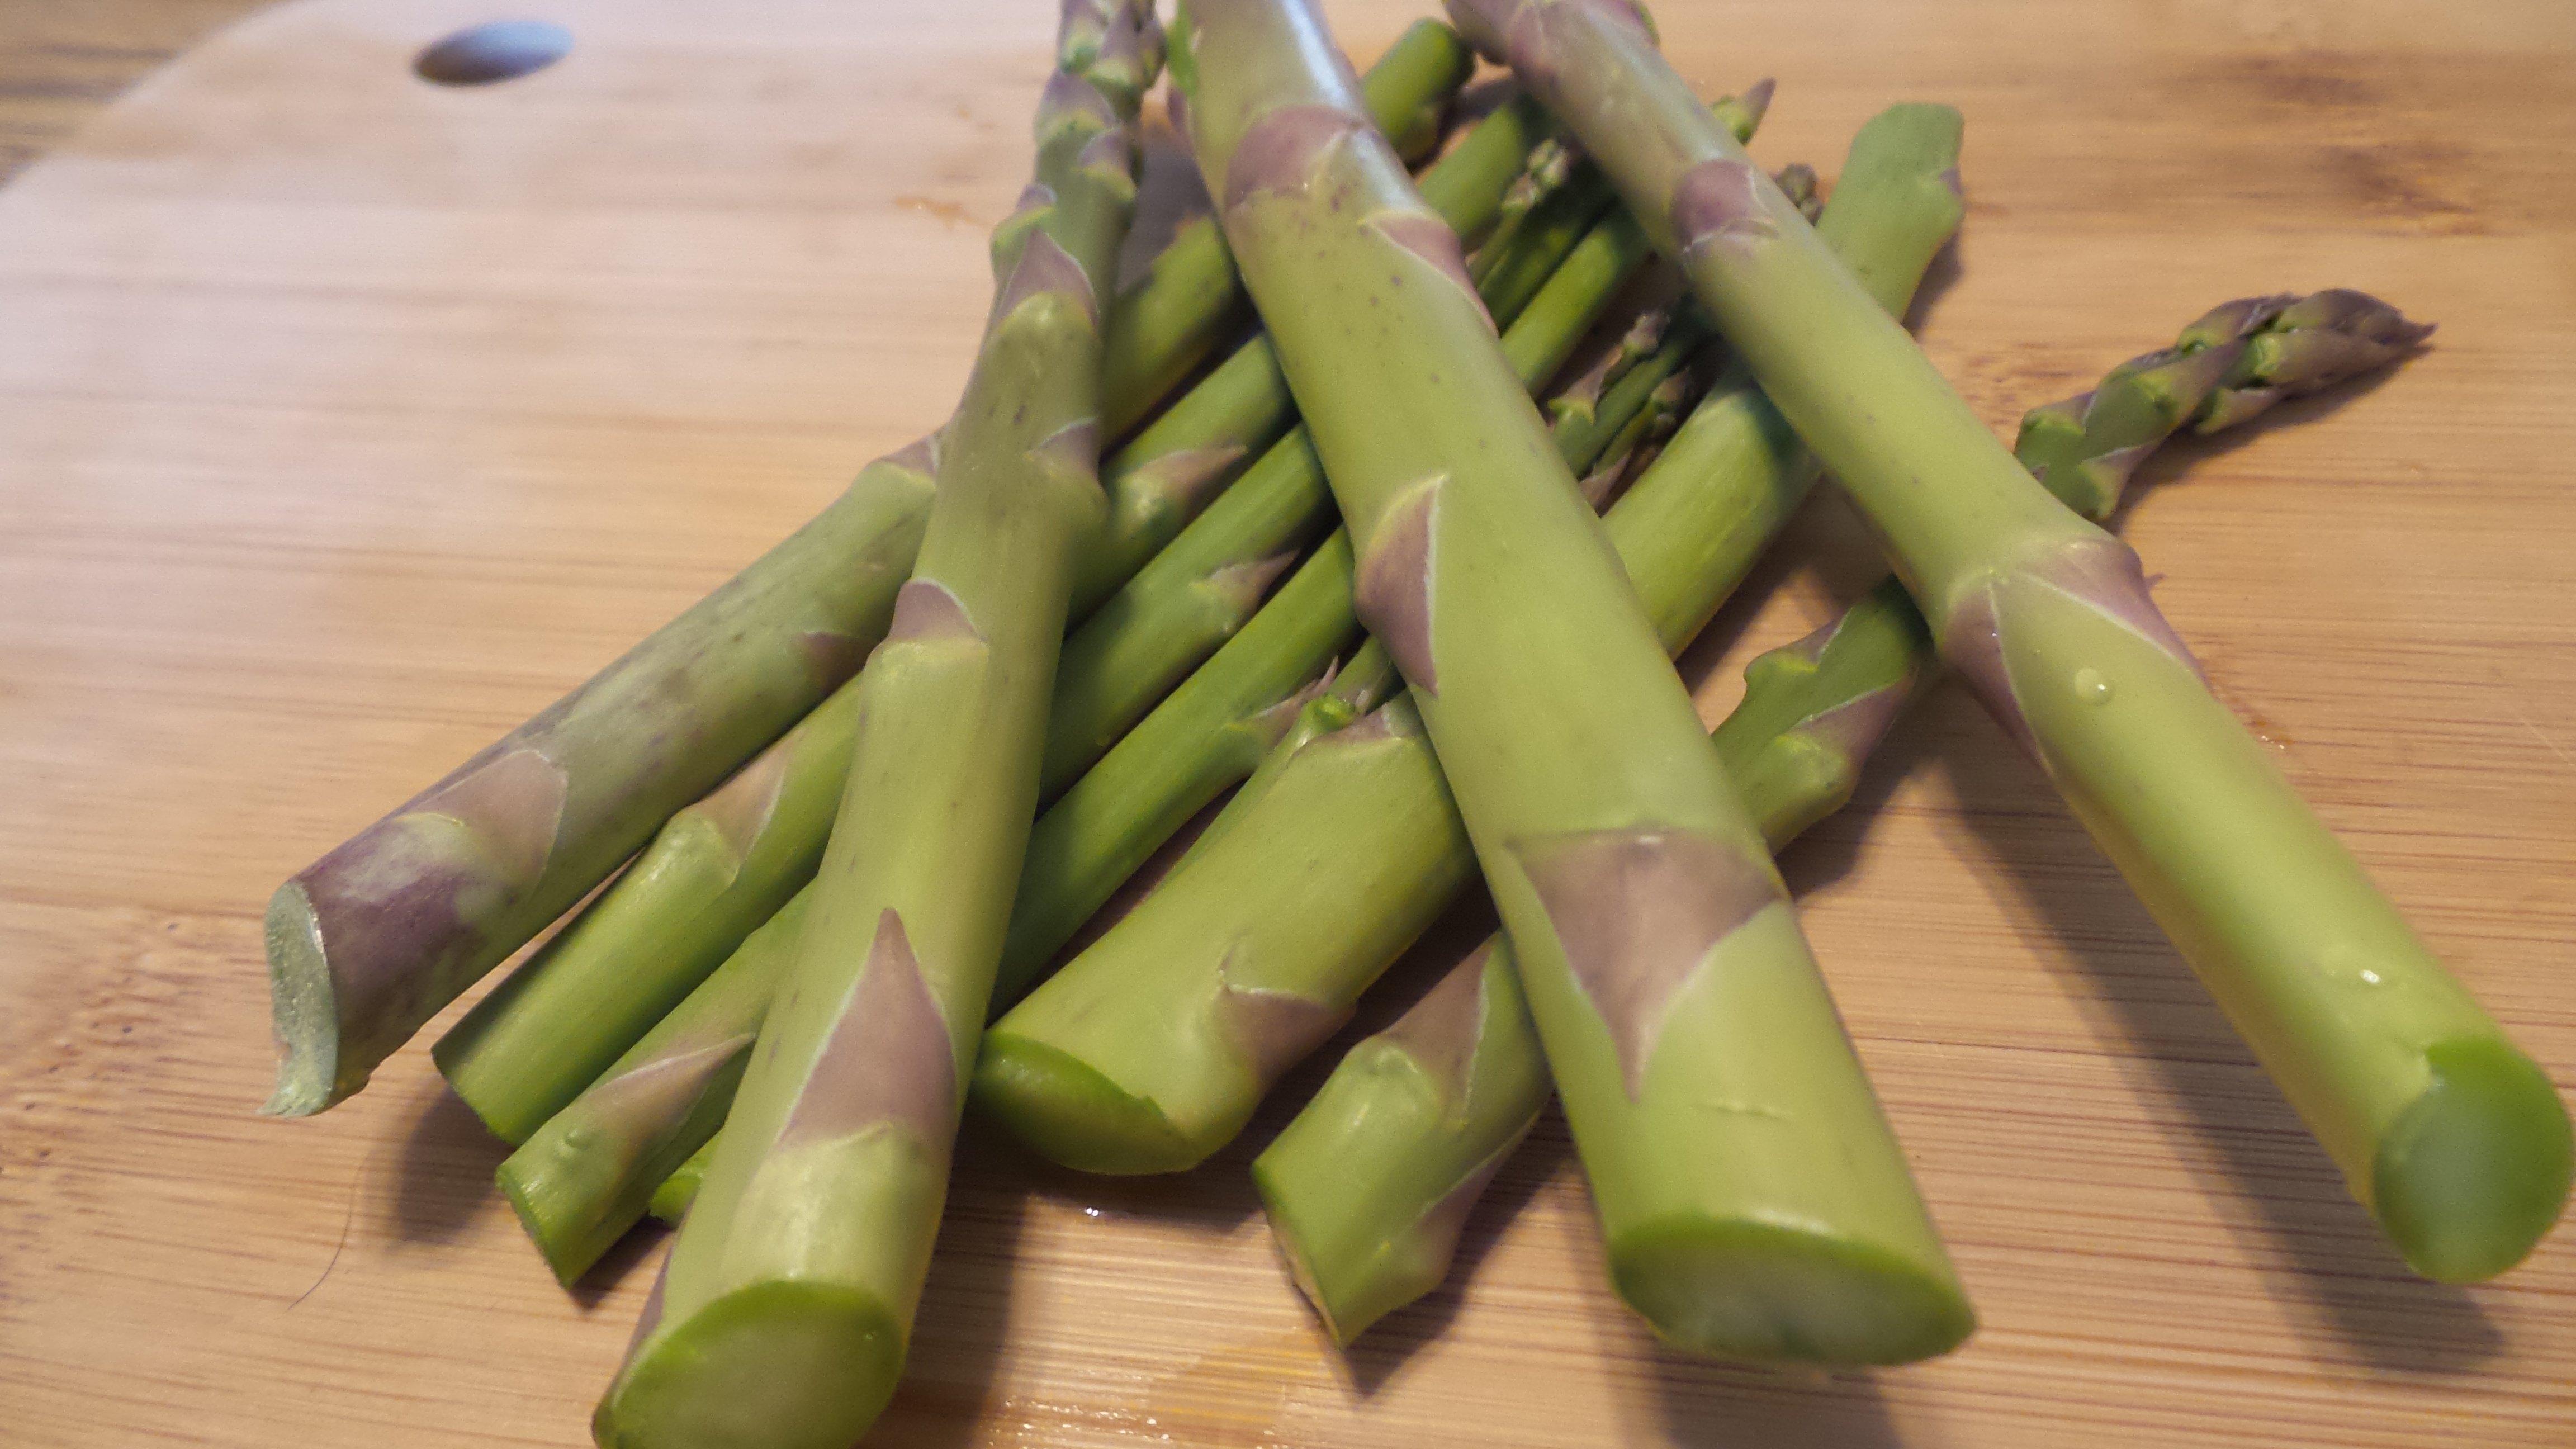 Wild asparagus rinsed, trimmed and ready for the grill.